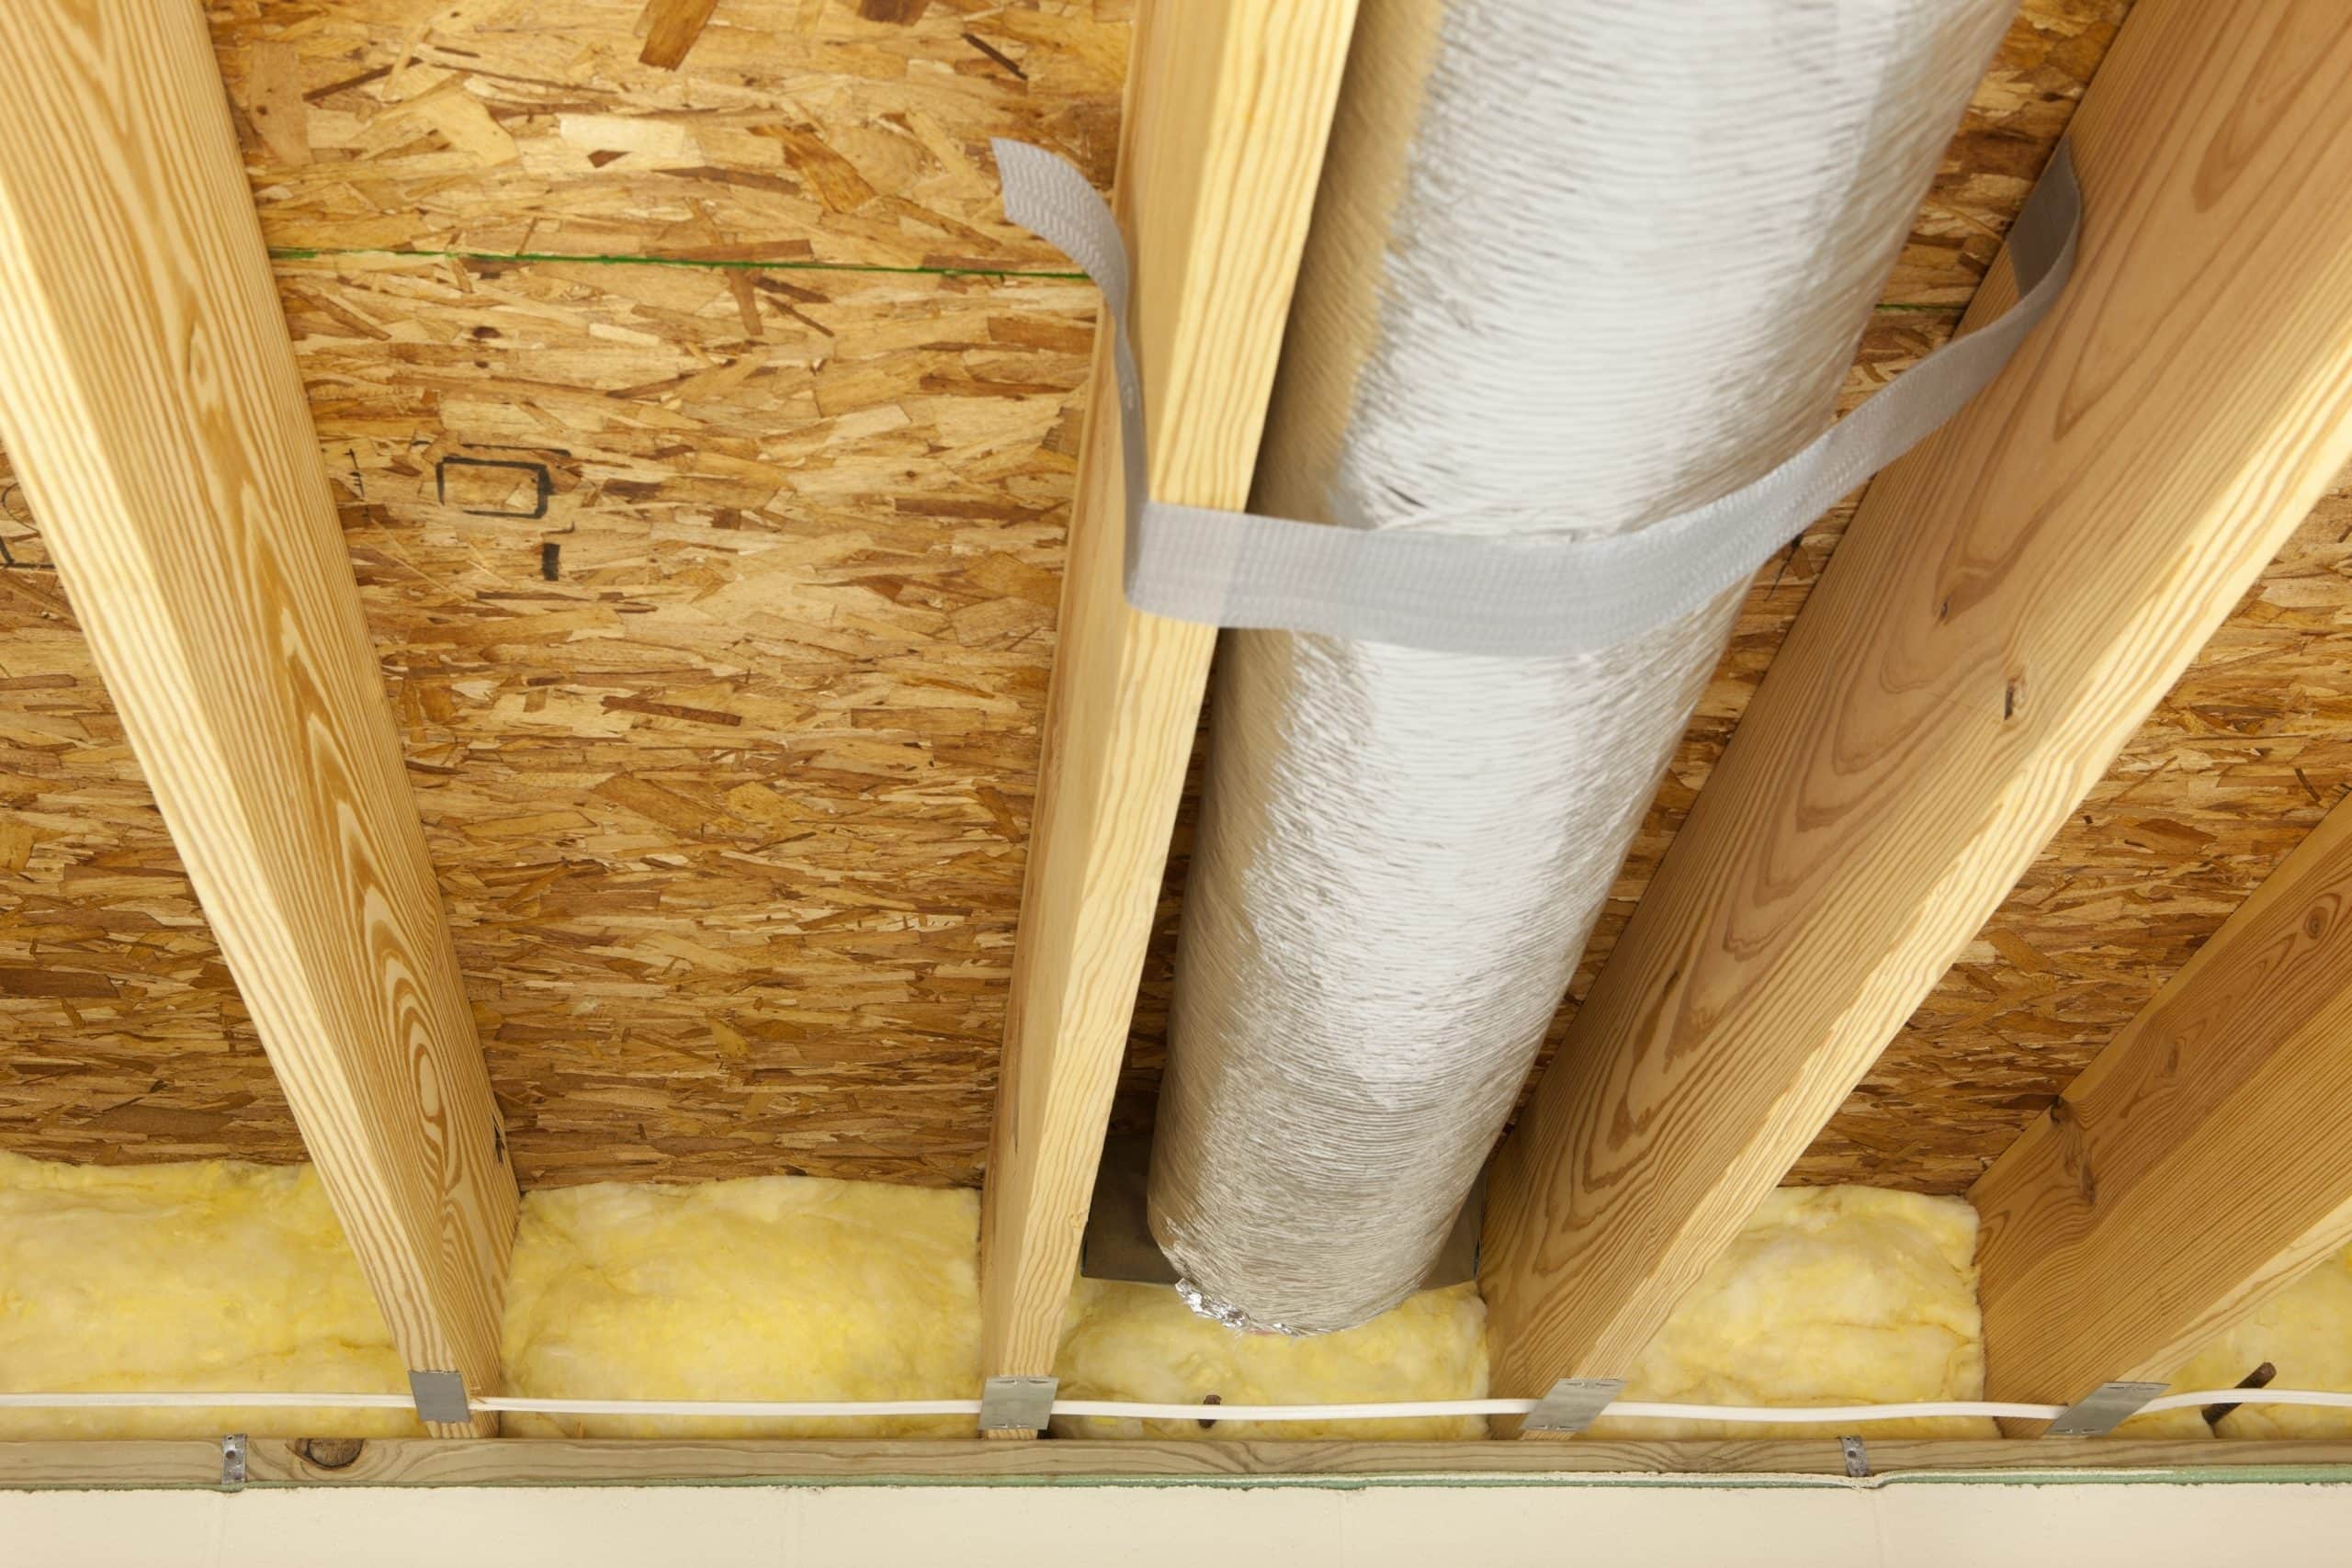 Basement Insulation and Air Duct